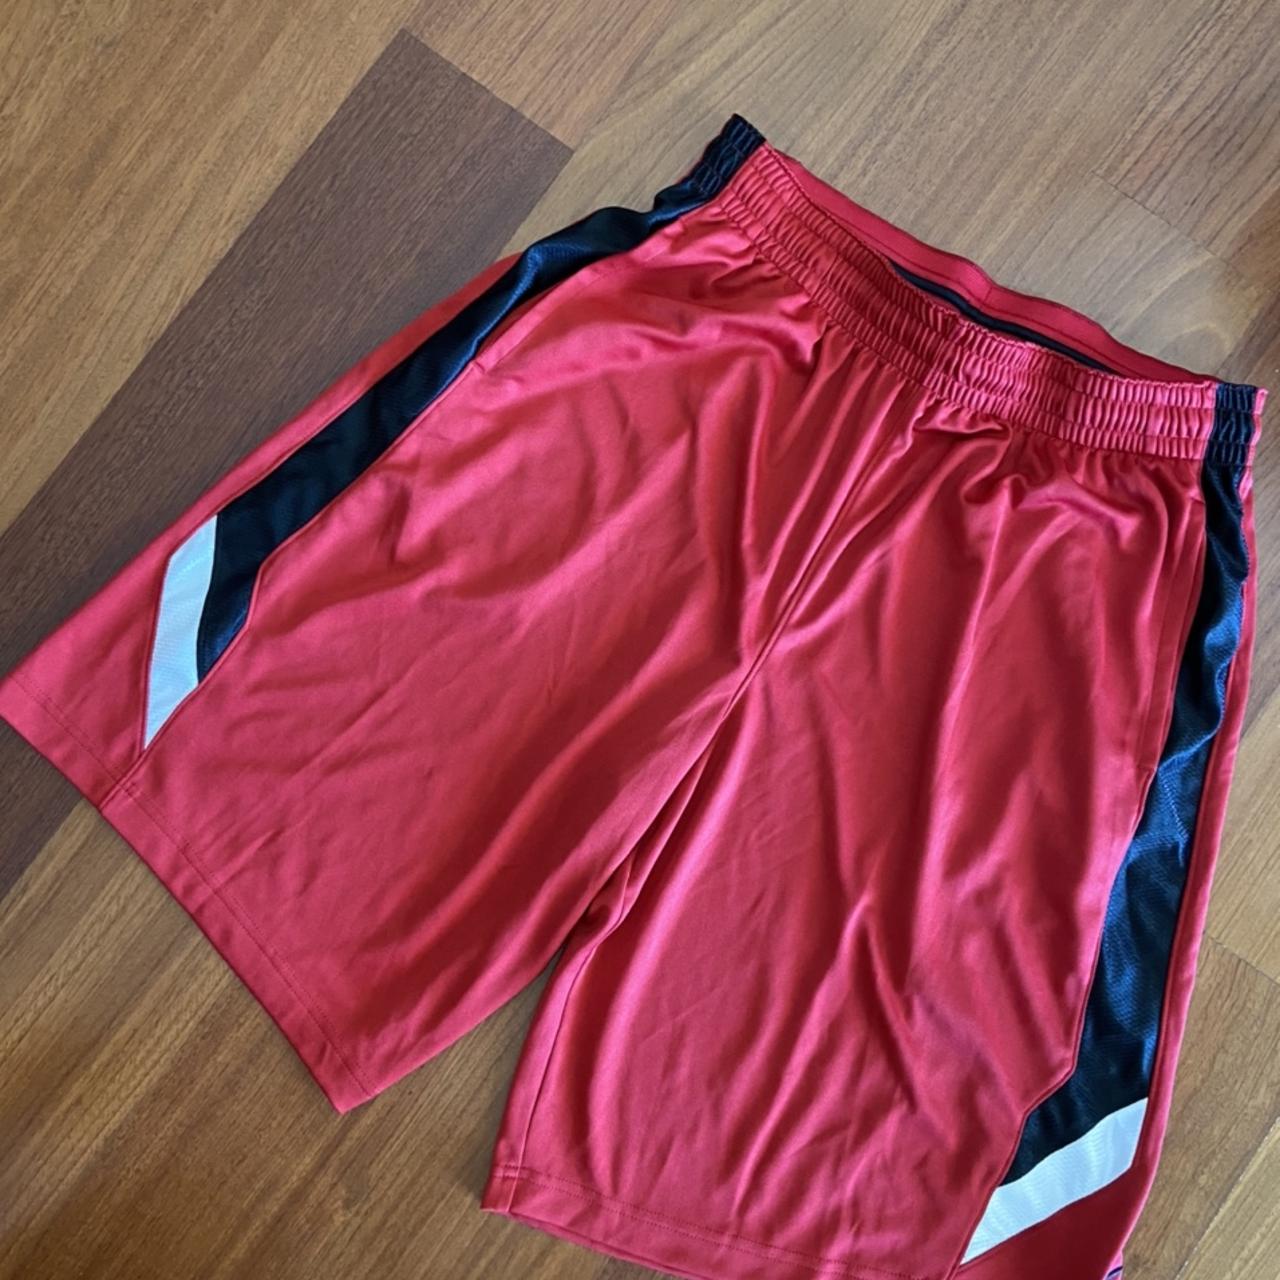 Nike Dri-Fit Men’s Basketball Shorts in XL with... - Depop